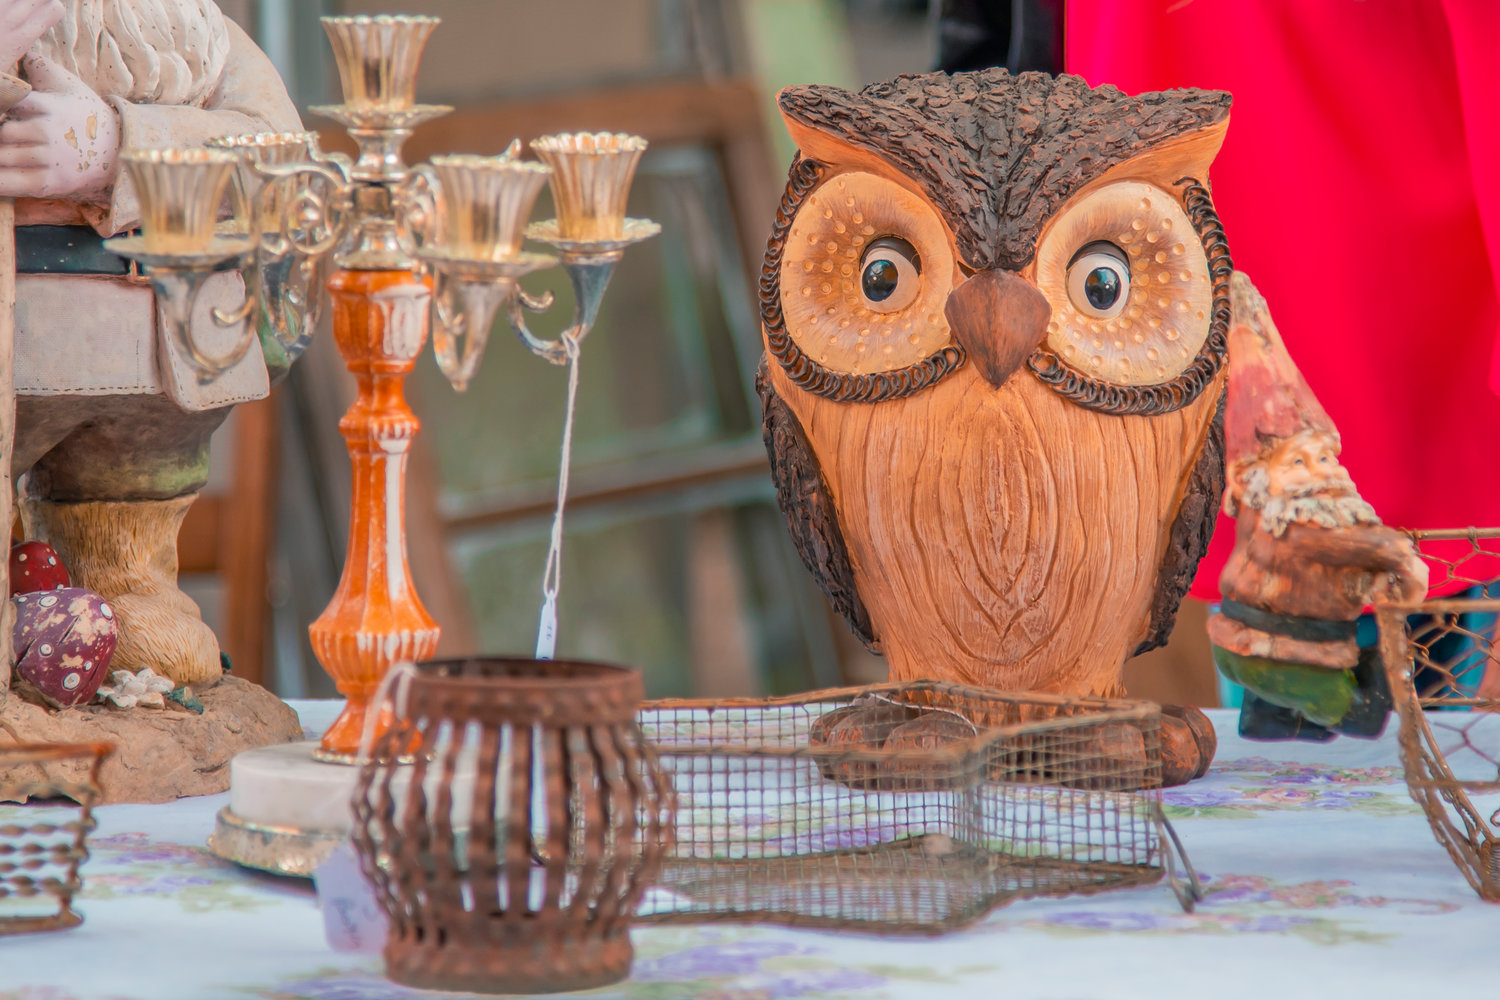 Decorative pieces sit on display during Antique Fest in downtown Centralia on Friday.